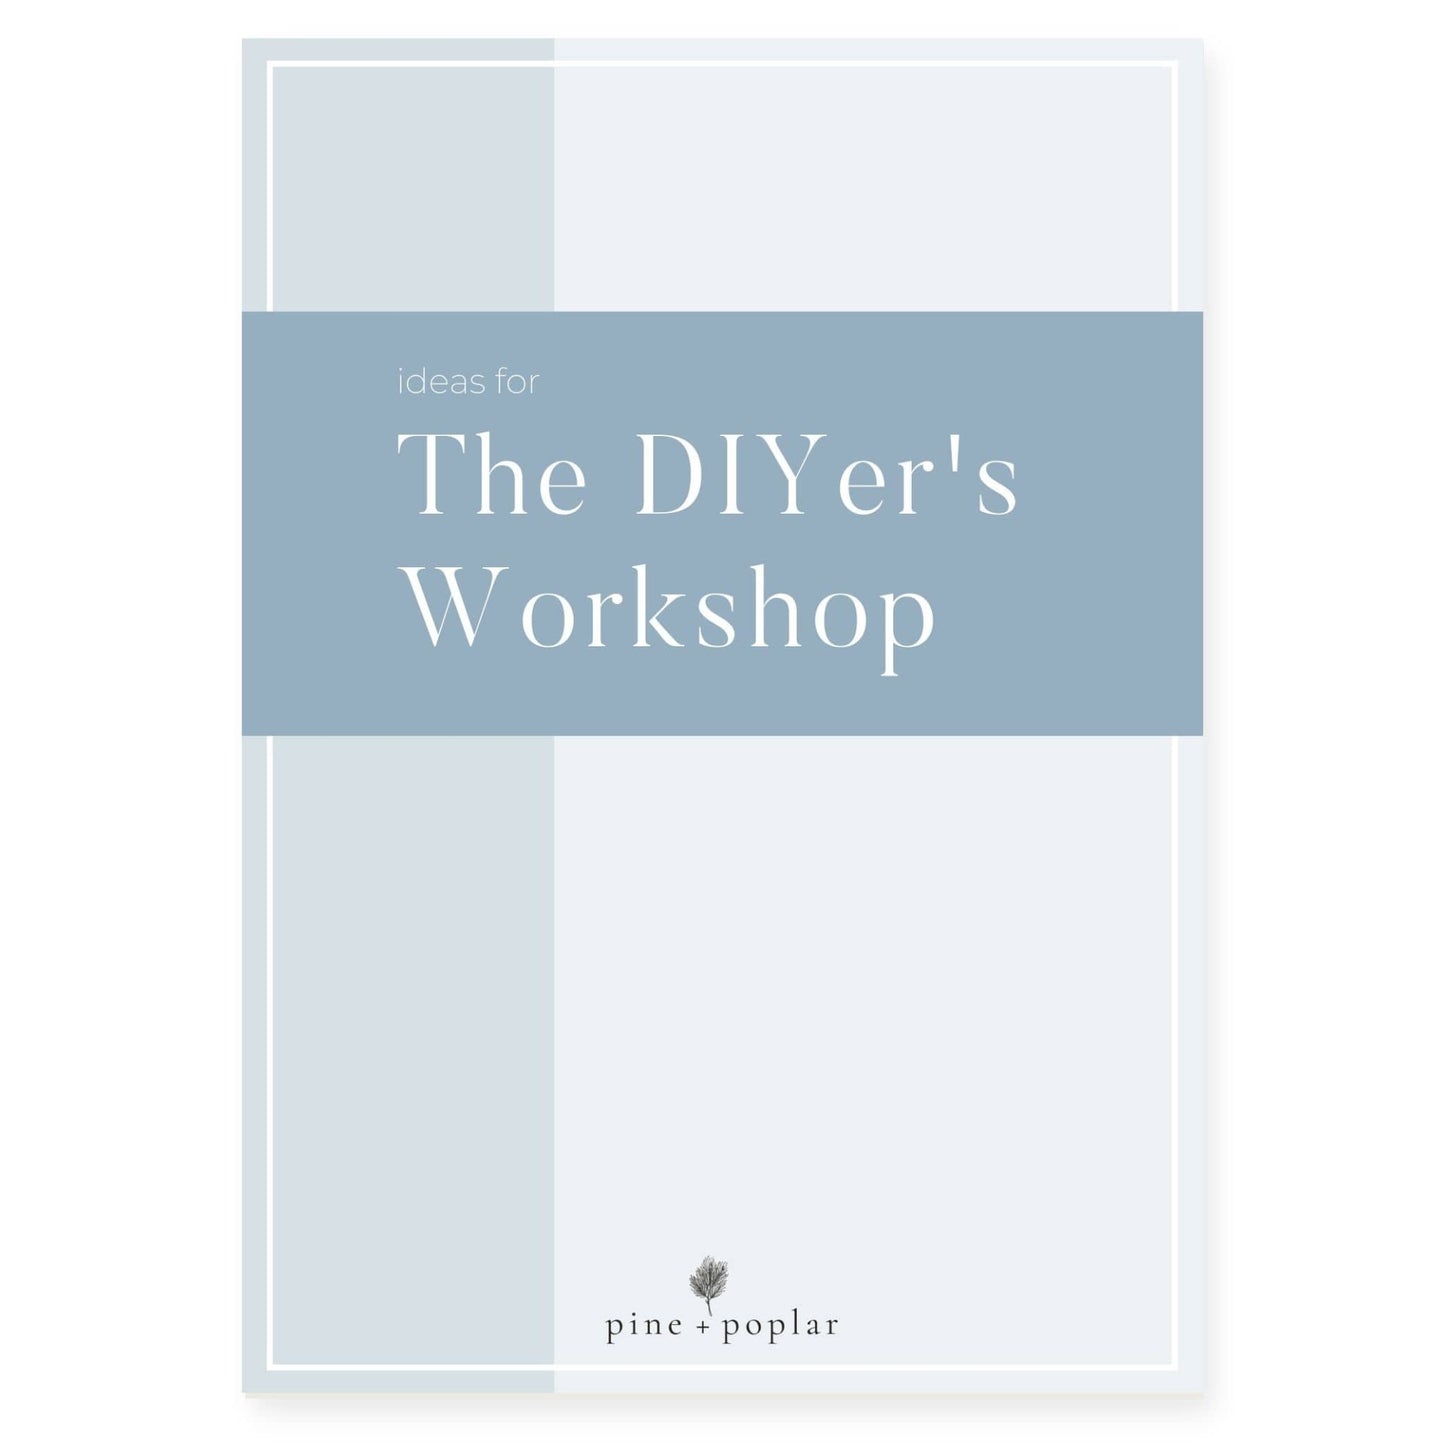 Ideas for the DIYer's Workshop Guide